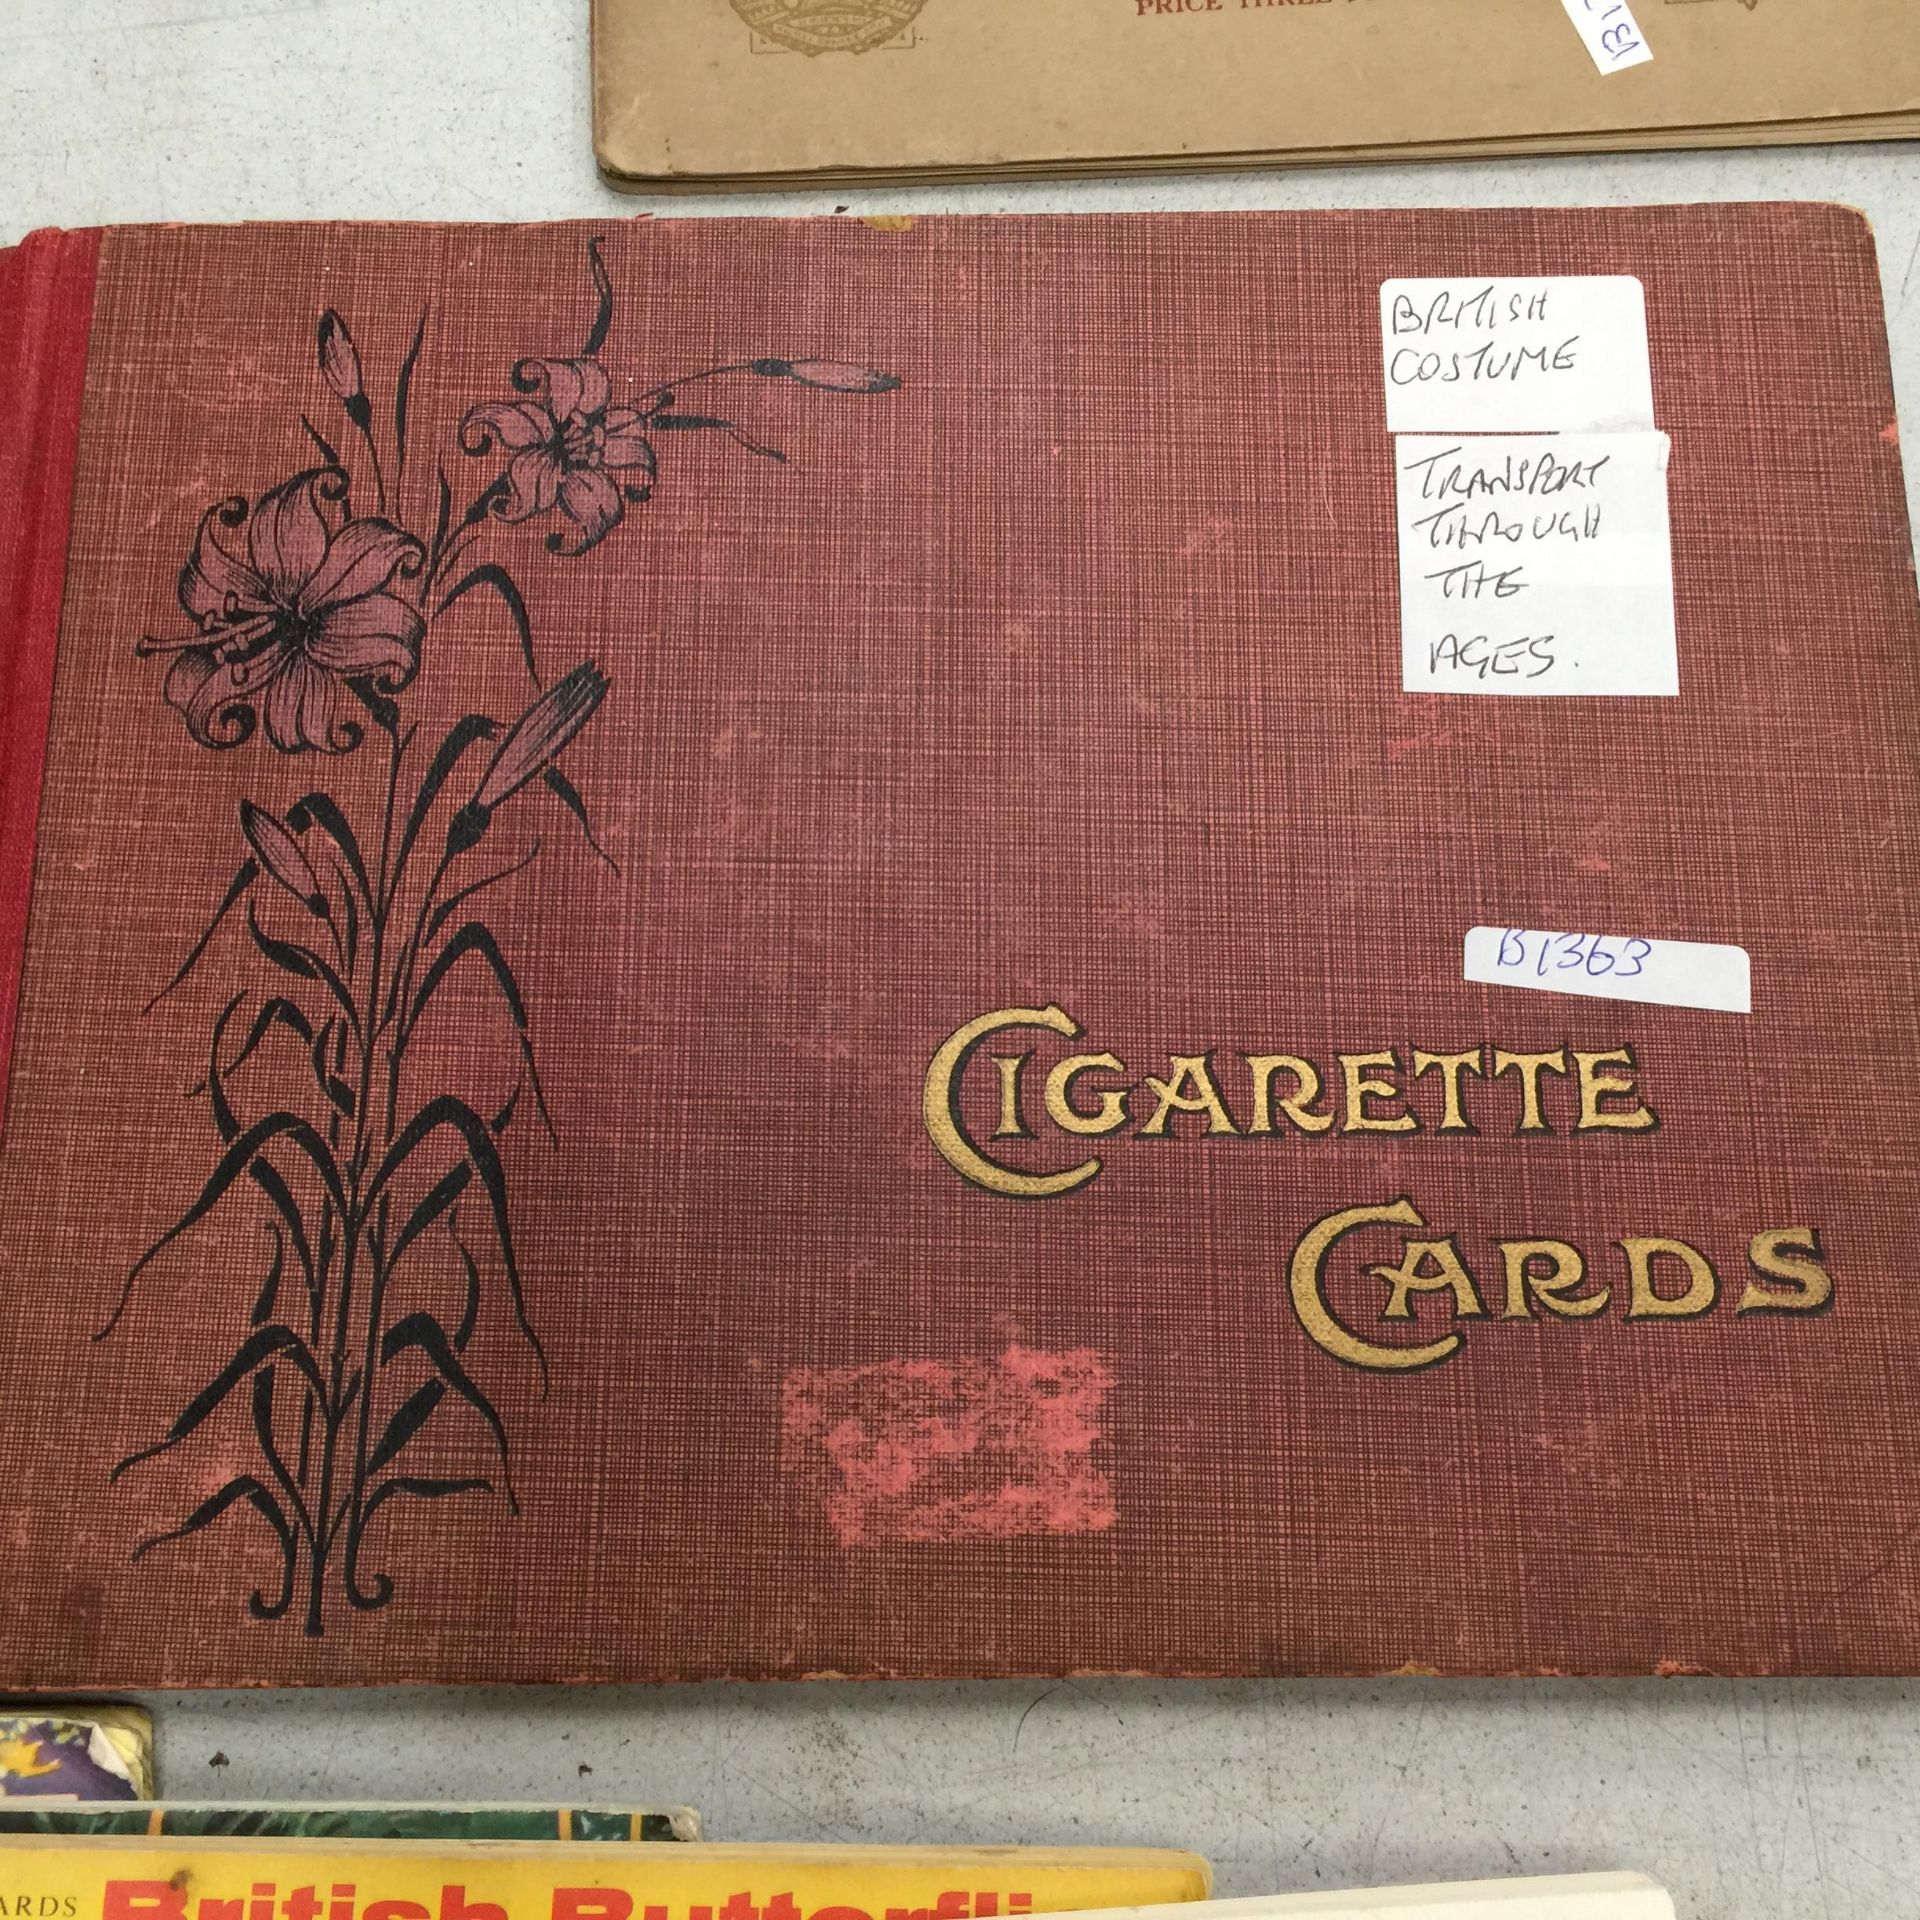 TWELVE TEA PICTURE CARD ALBUMS WITH CARDS PLUS THREE LARGE CIGARETTE CARD ALBUMS WITH CARDS TO - Image 3 of 4